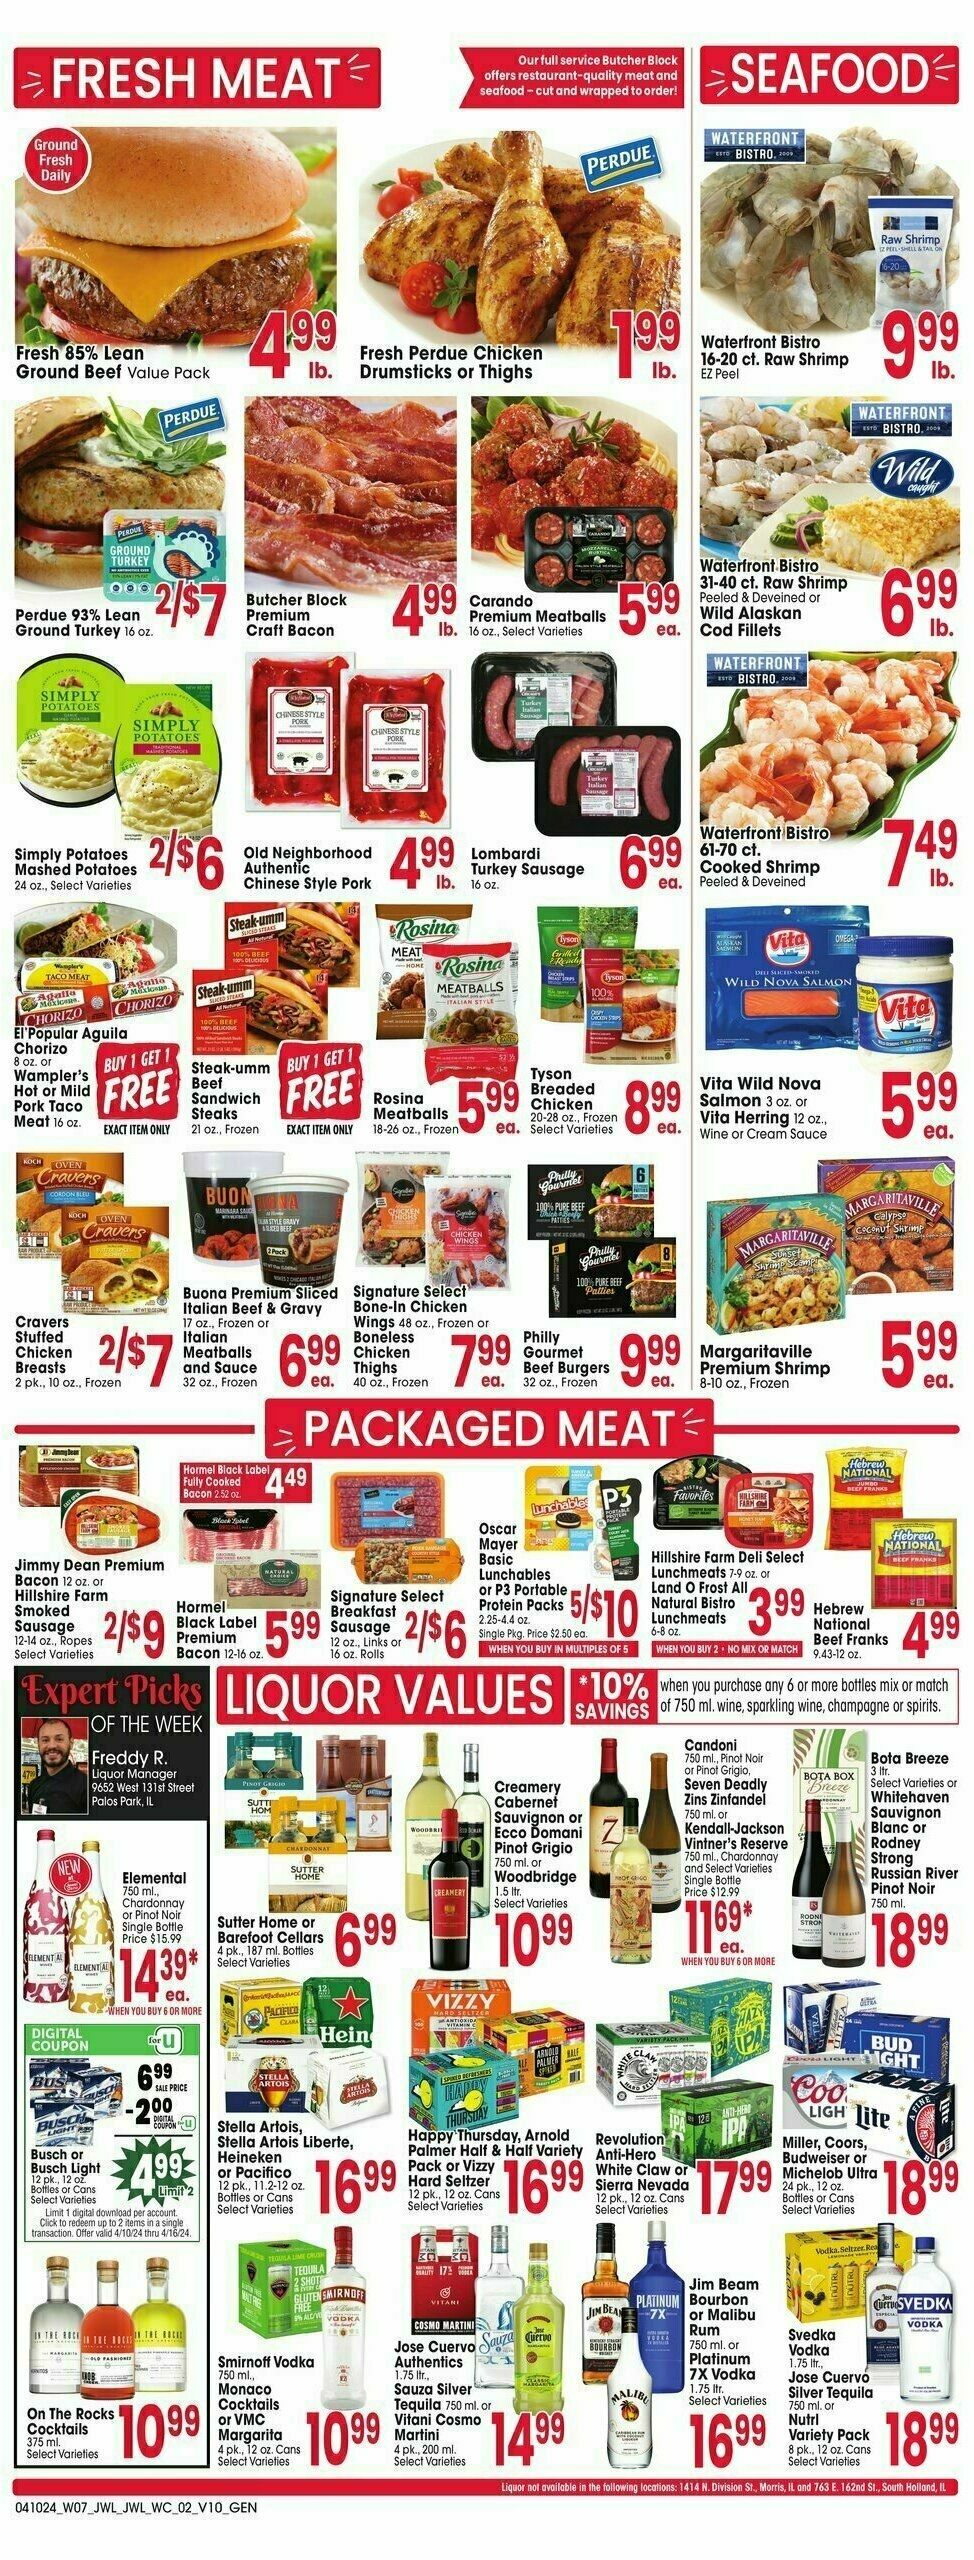 Jewel Osco Weekly Ad from April 10